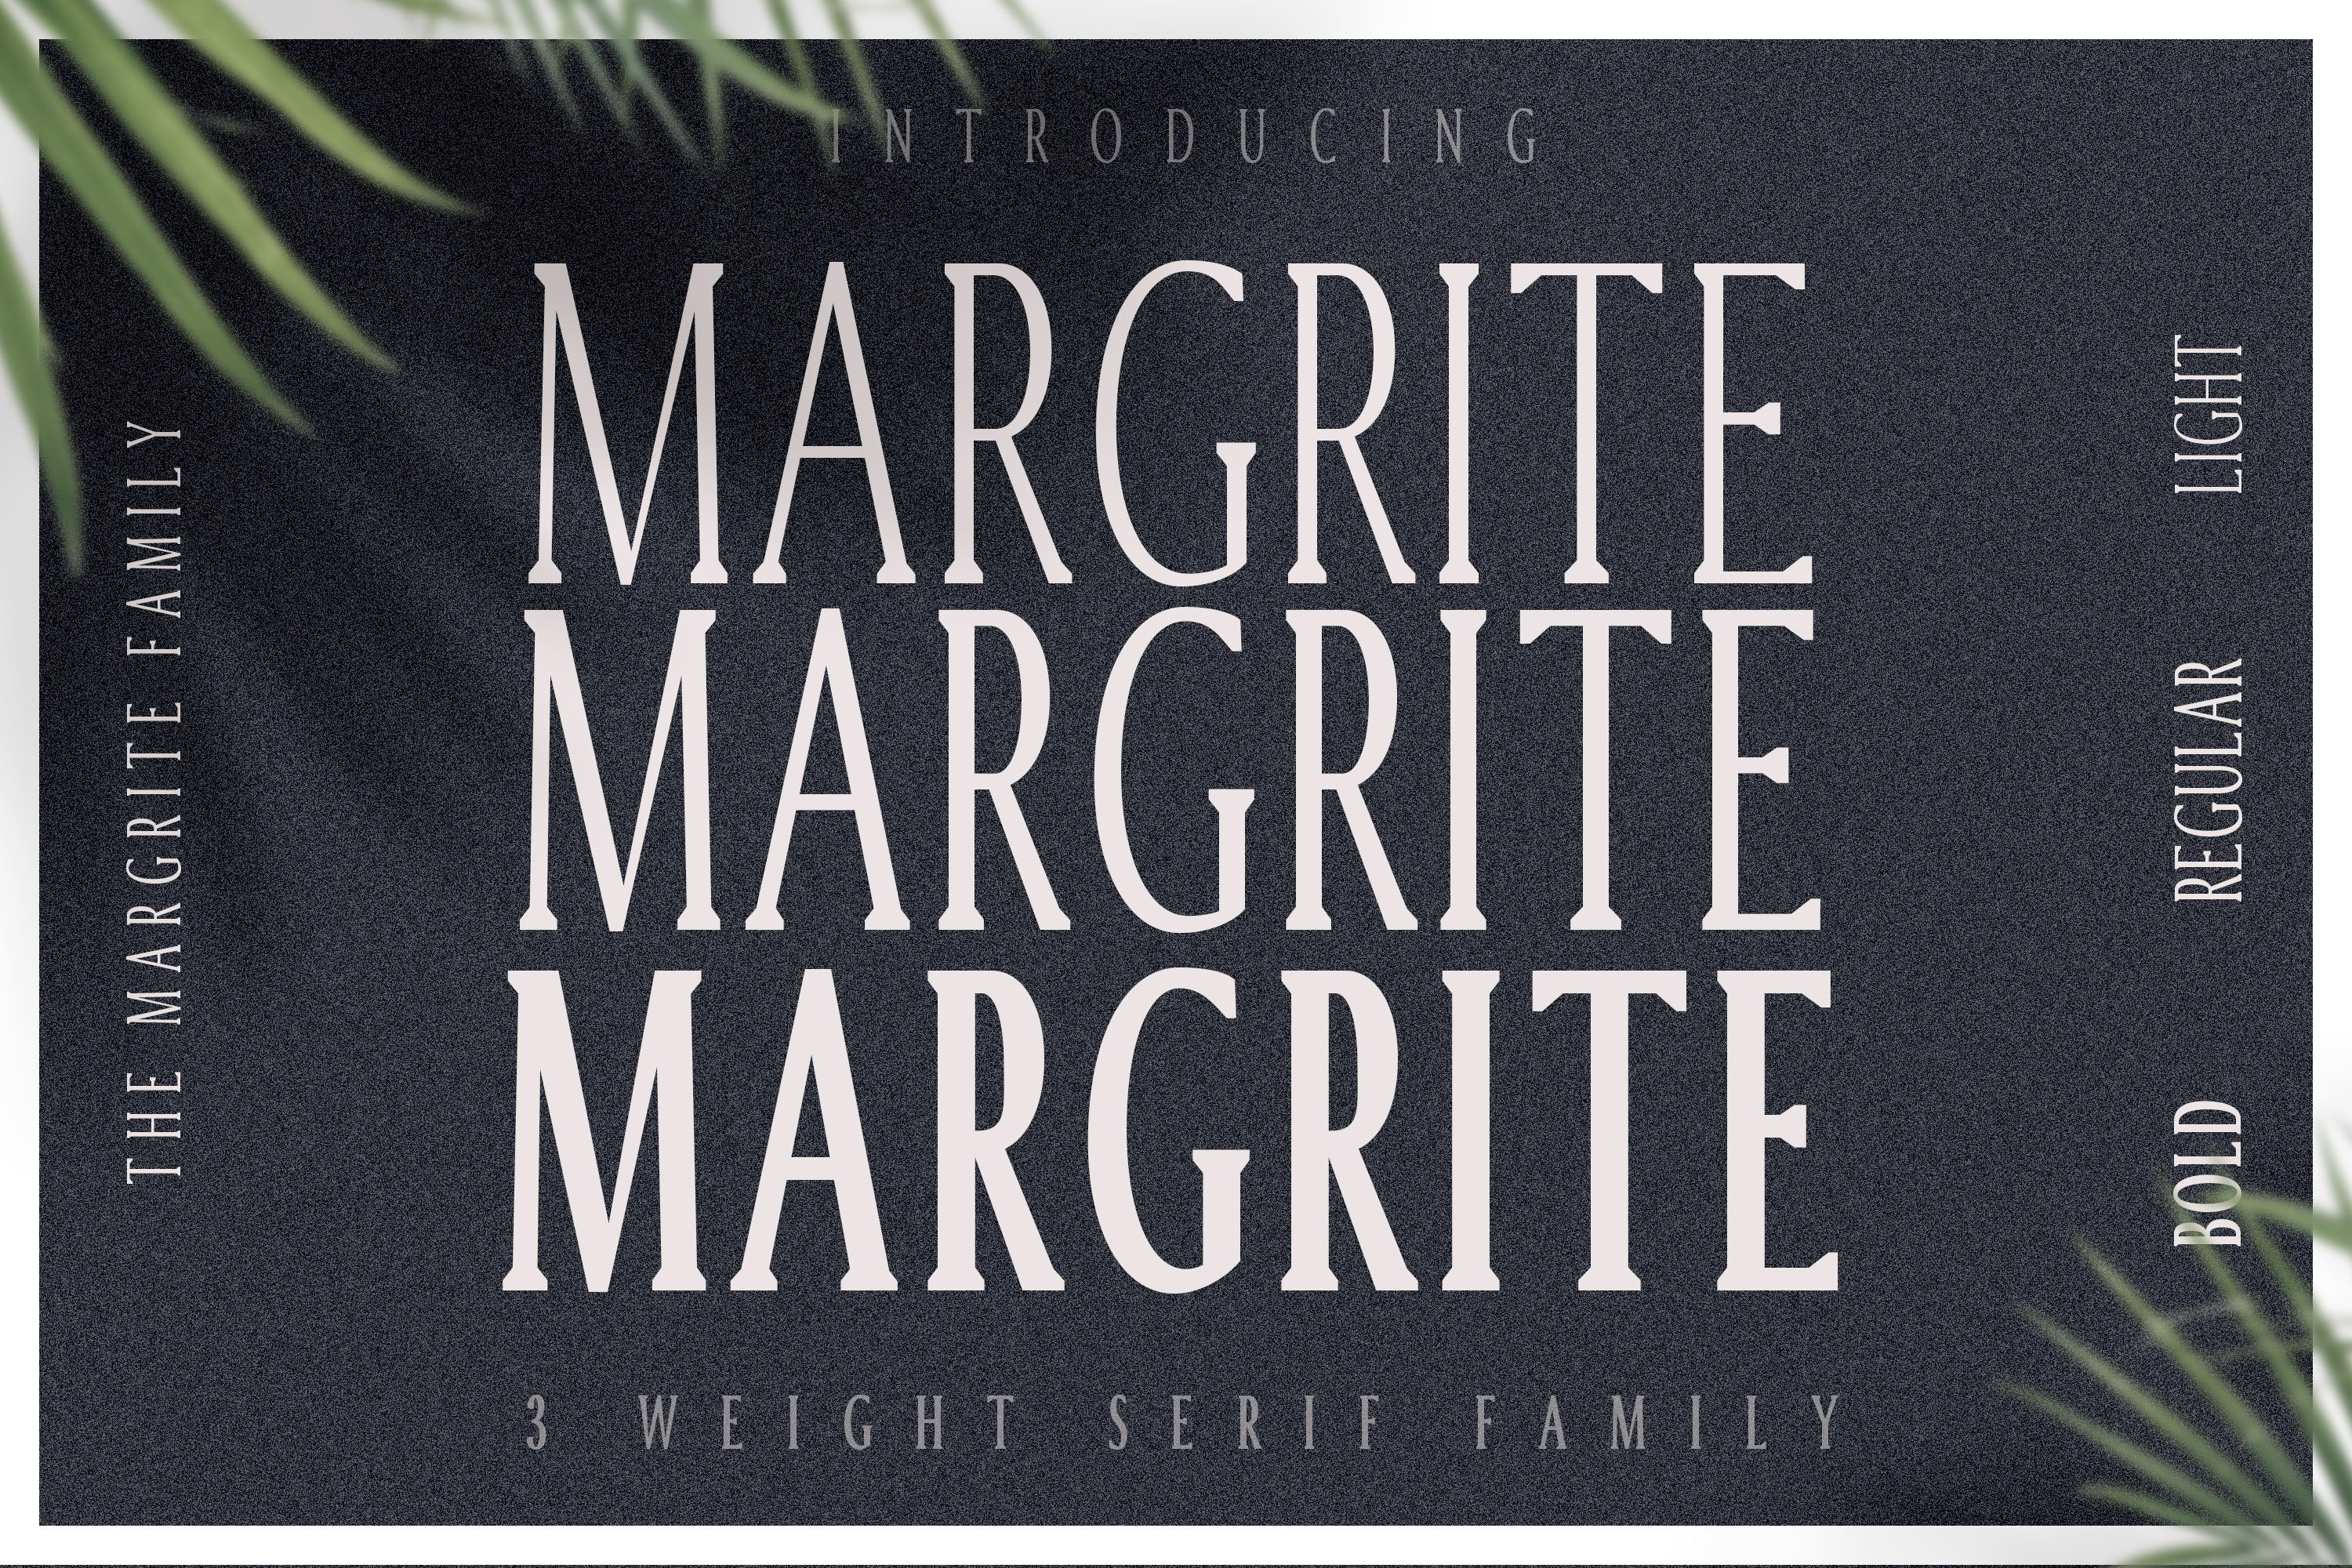 Margrite - Tall Serif Font Family cover image.